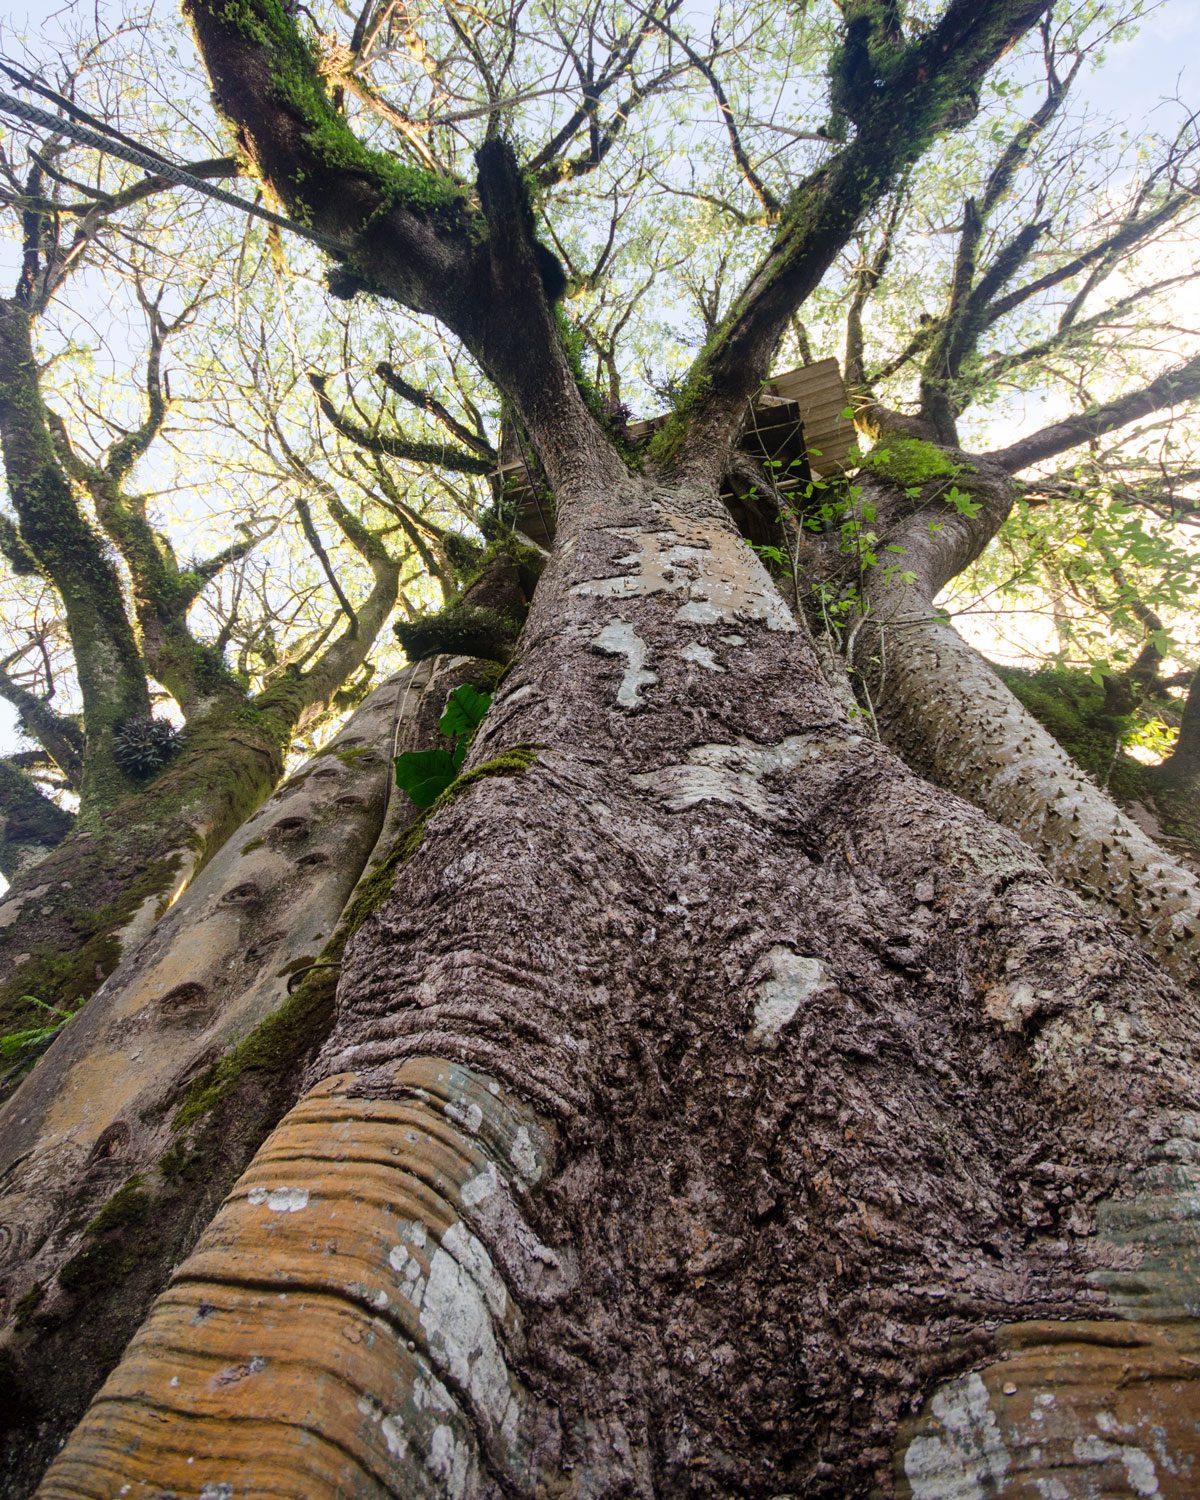 From the ground looking up at the oldest ceibo tree, San Cristobal, The Galapagos | ©Angela Drake